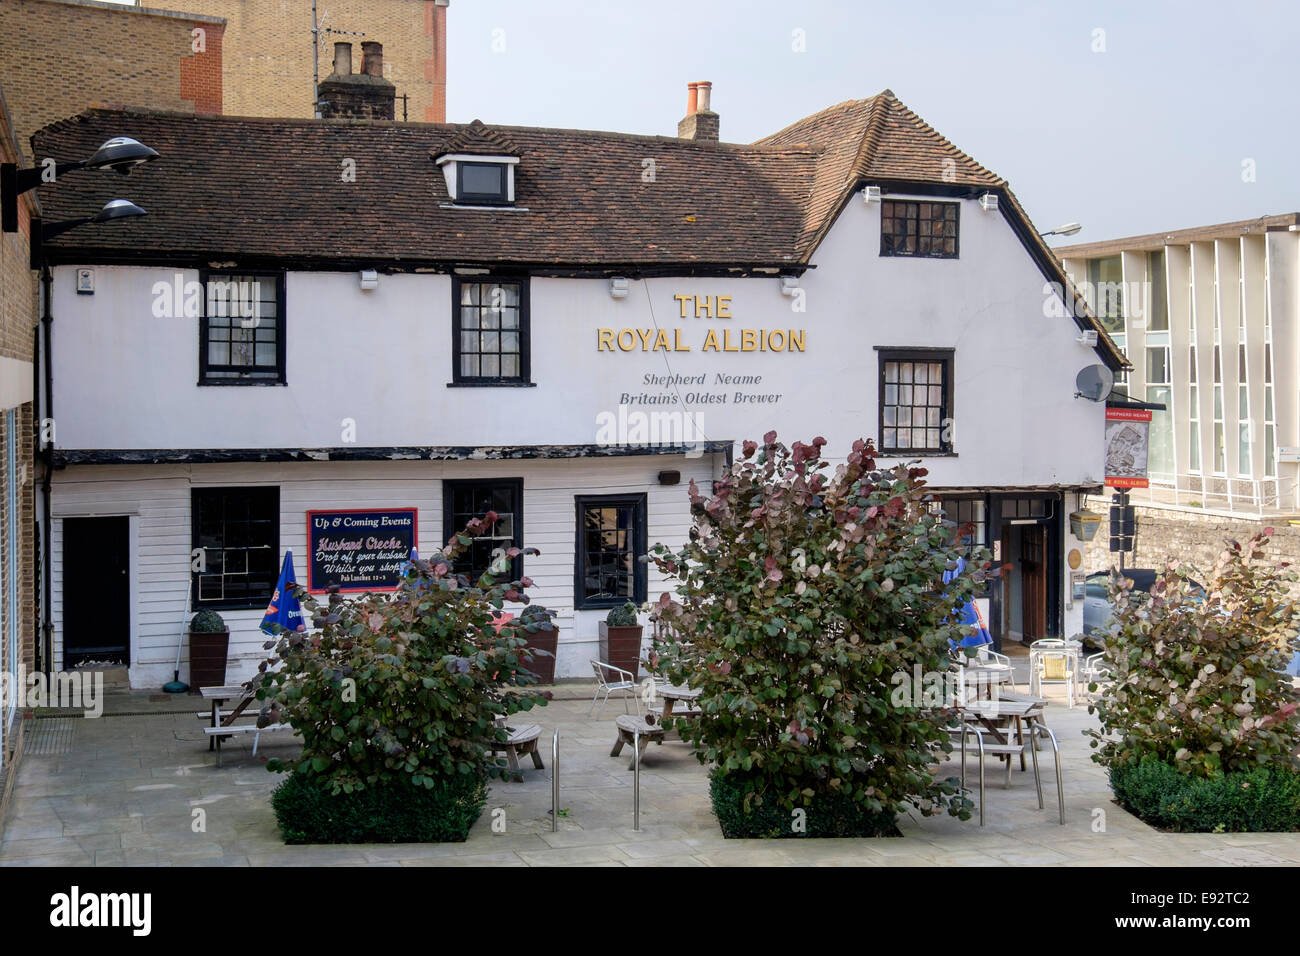 The Royal Albion pub for Shepherd Neame brewery is oldest building in Maidstone, Kent, England, UK, Britain Stock Photo